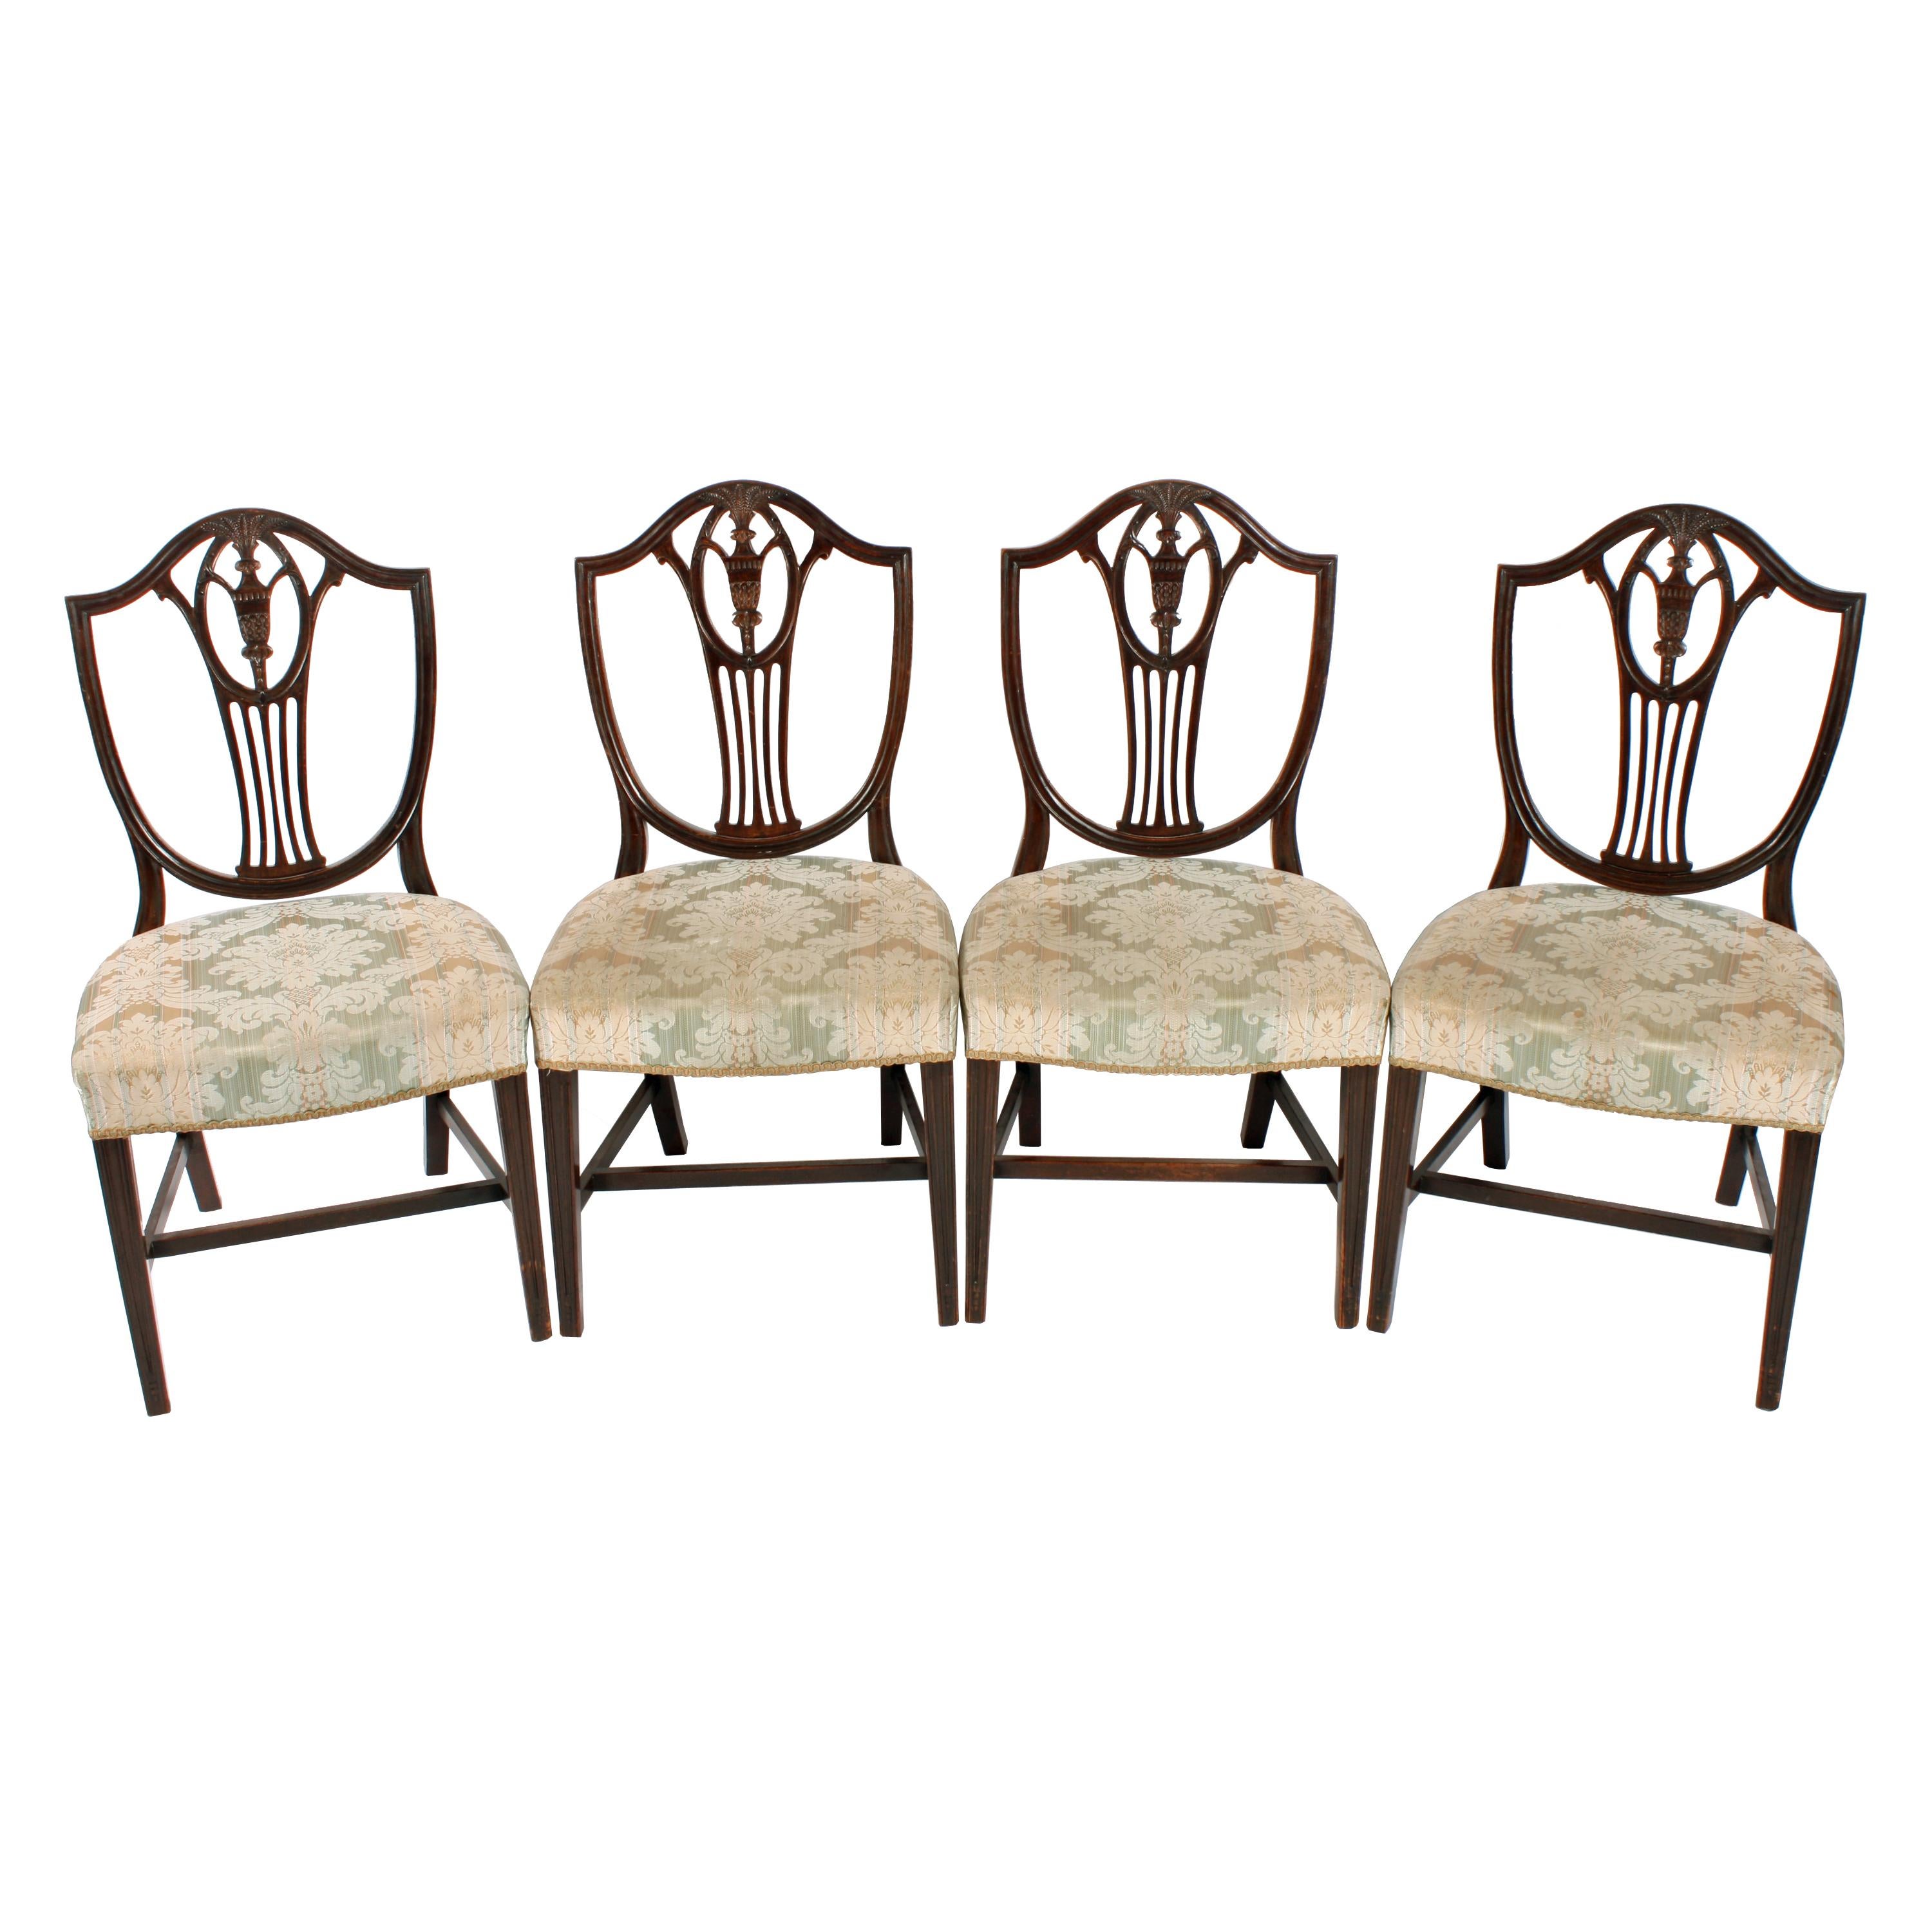 A set of four late 19th century Hepplewhite design mahogany dining room chairs.

The chairs are in a very good Georgian style with shield shaped backs that have a pierced centre splat decorated with a carved urn and wheat sheaths.

The chairs